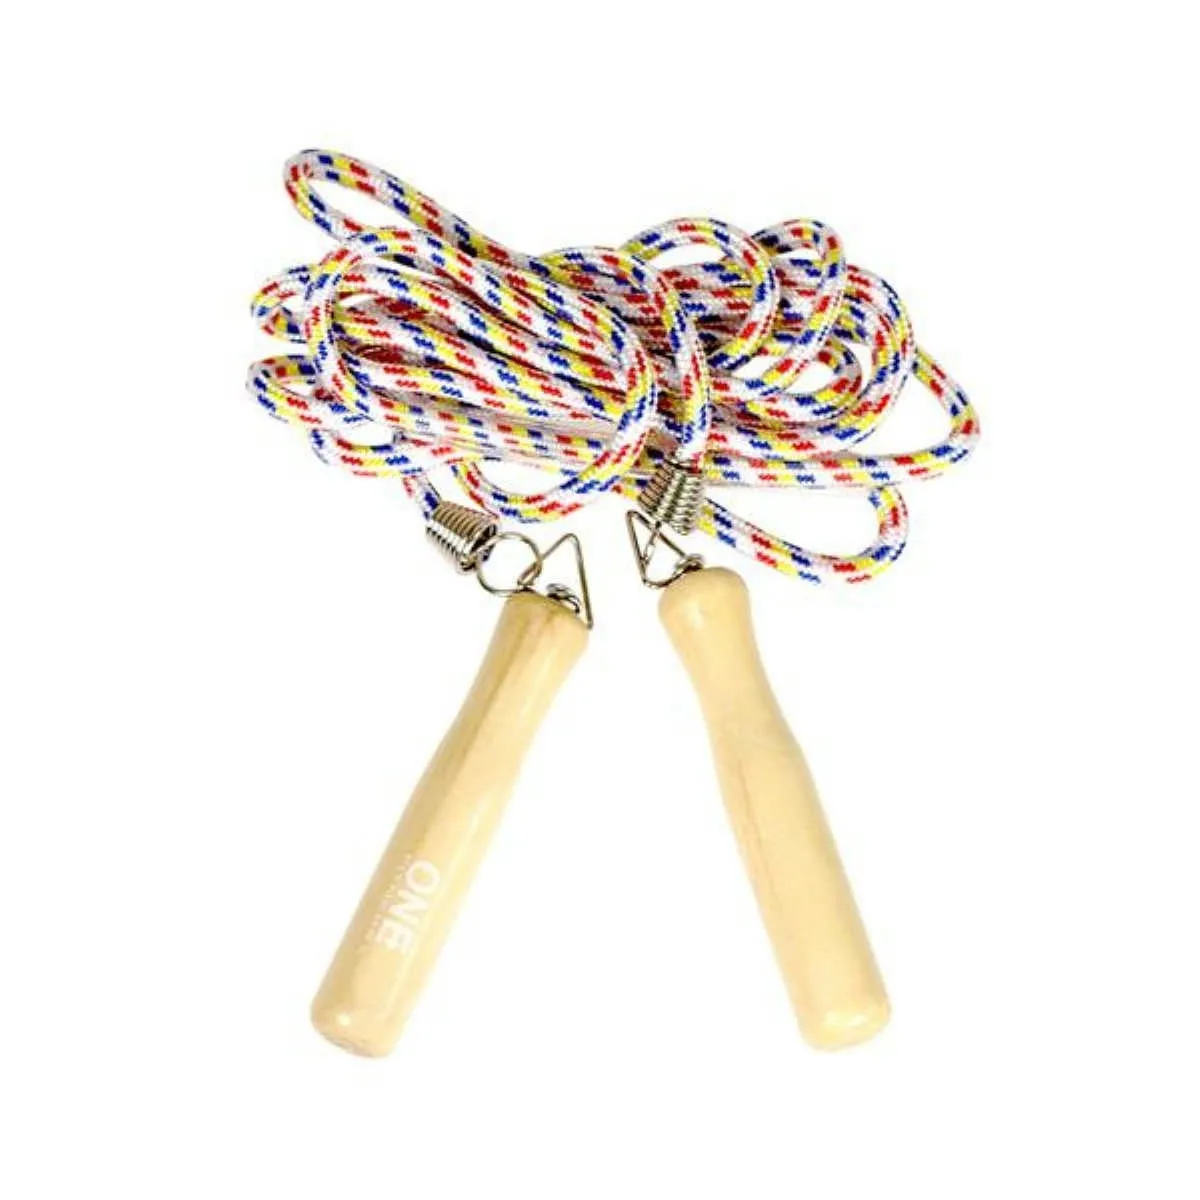 Standard skipping rope with wooden handles